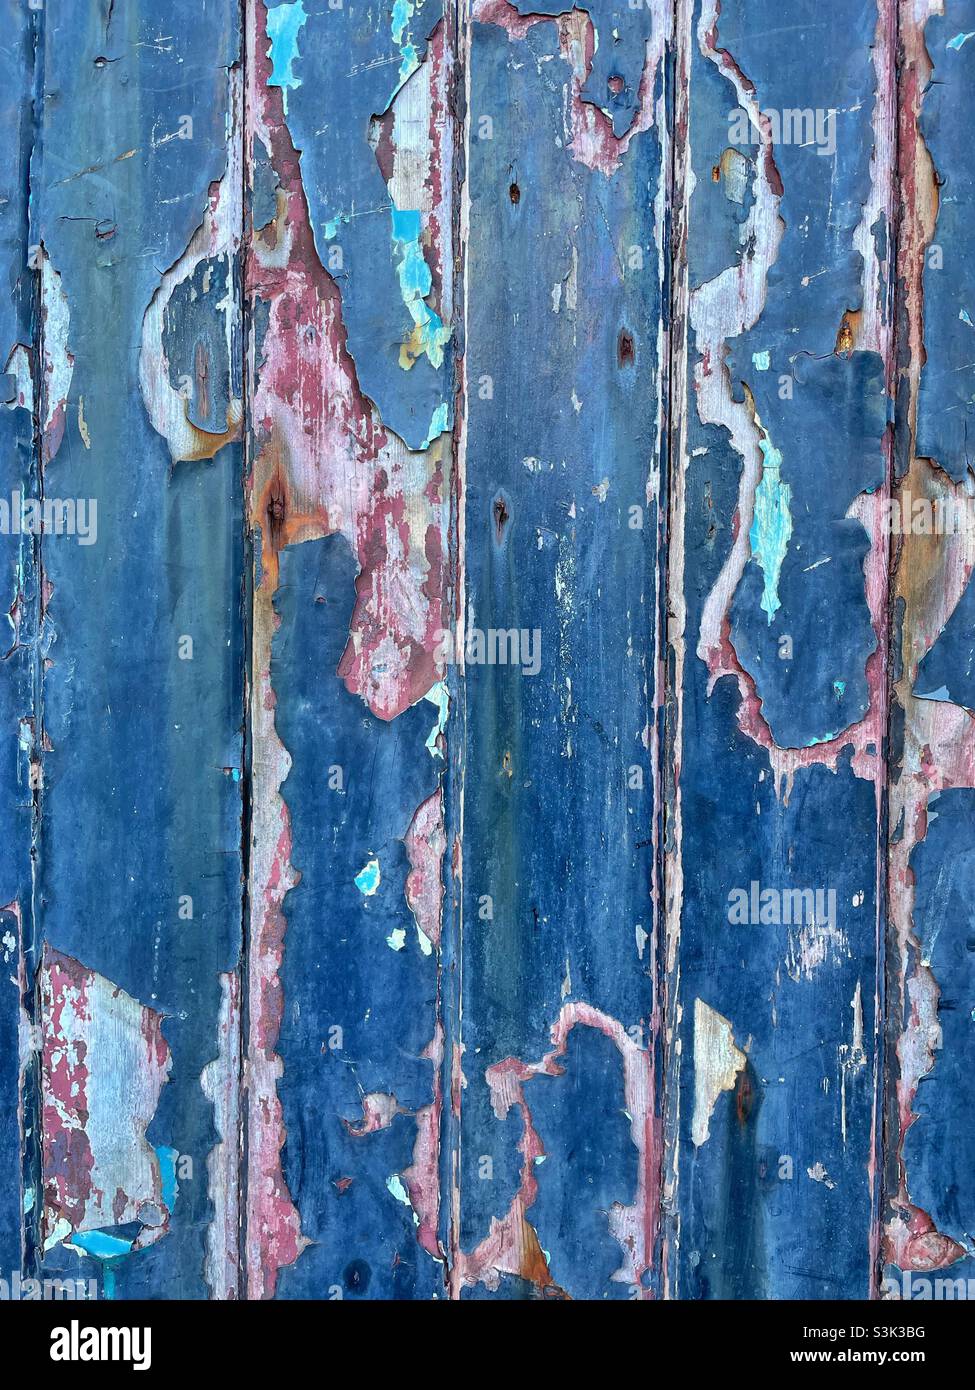 Flaking blue paint on an old wooden door revealing older layers of paint beneath. Stock Photo